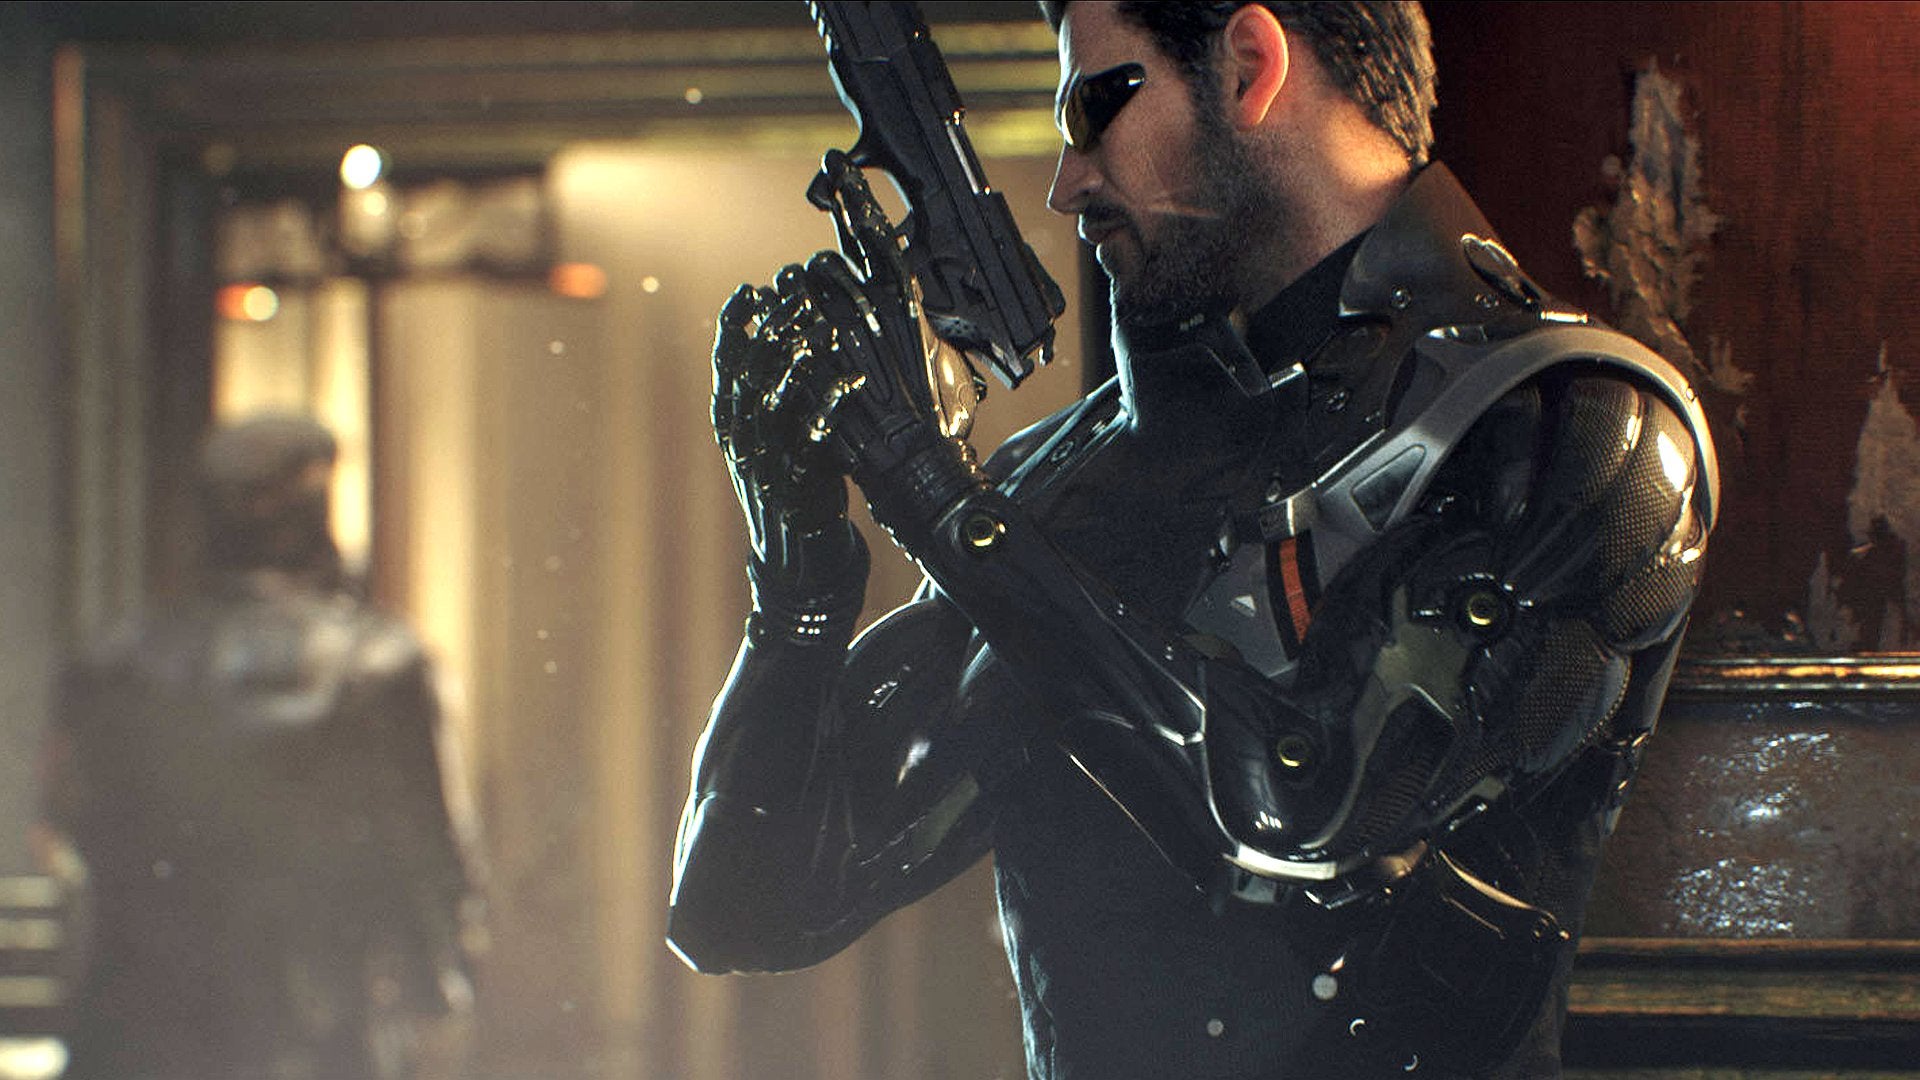 Image for Deus Ex: Mankind Divided tops UK charts but it's doing much worse than Human Revolution